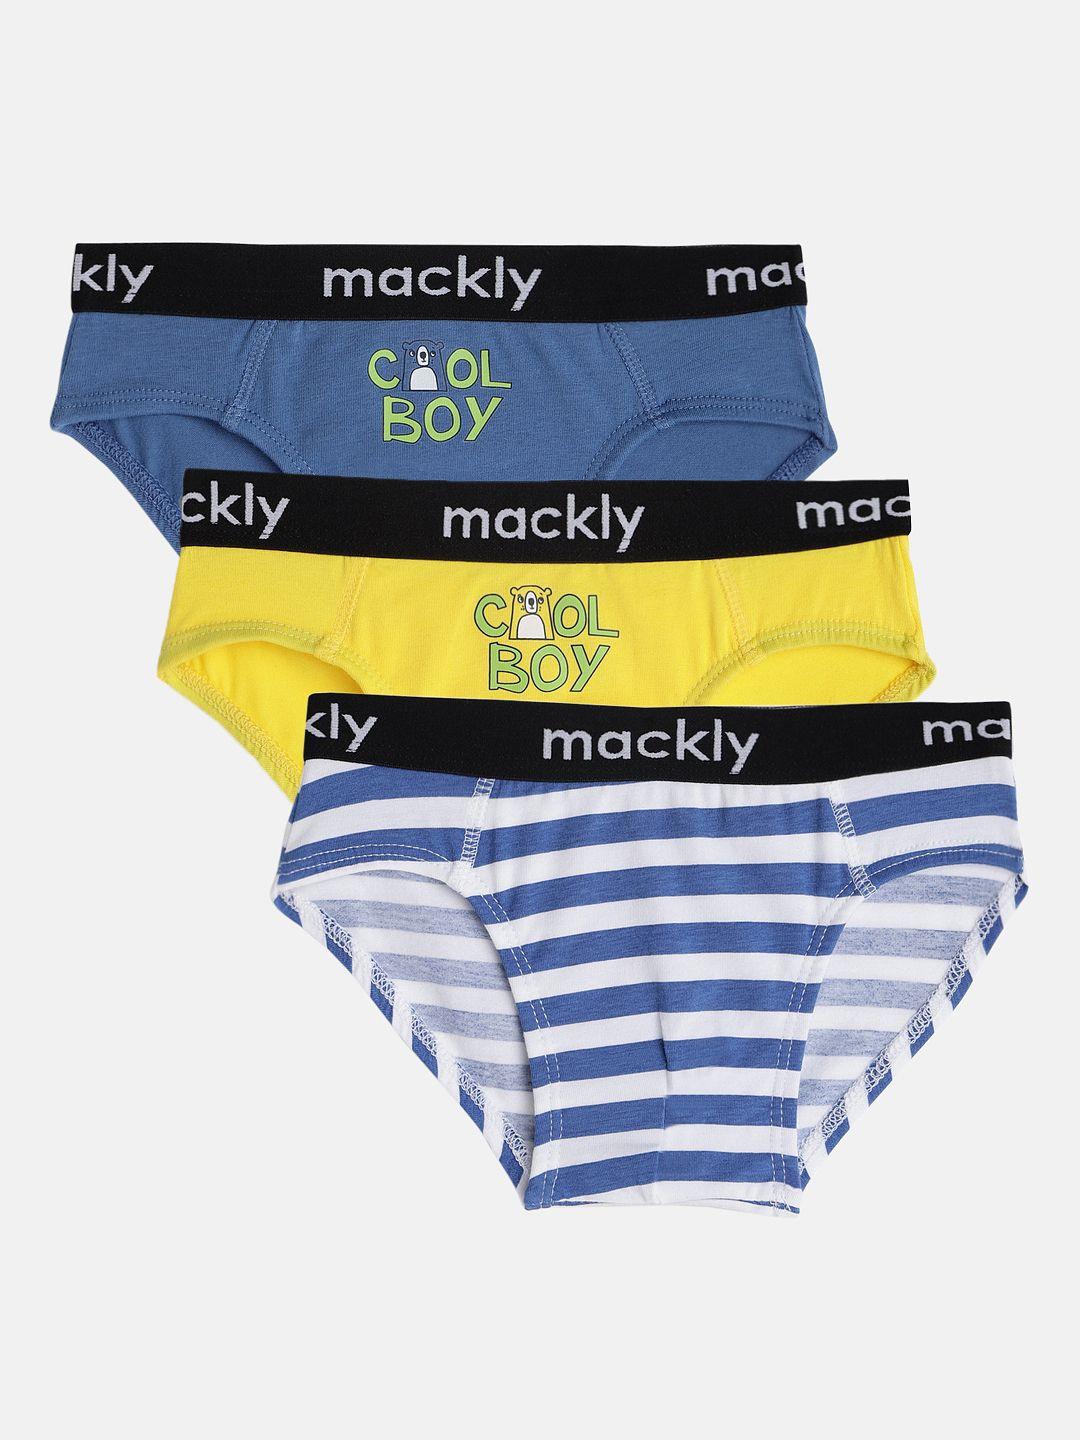 mackly-boys-pack-of-3-briefs-mb-14-2-4yrs